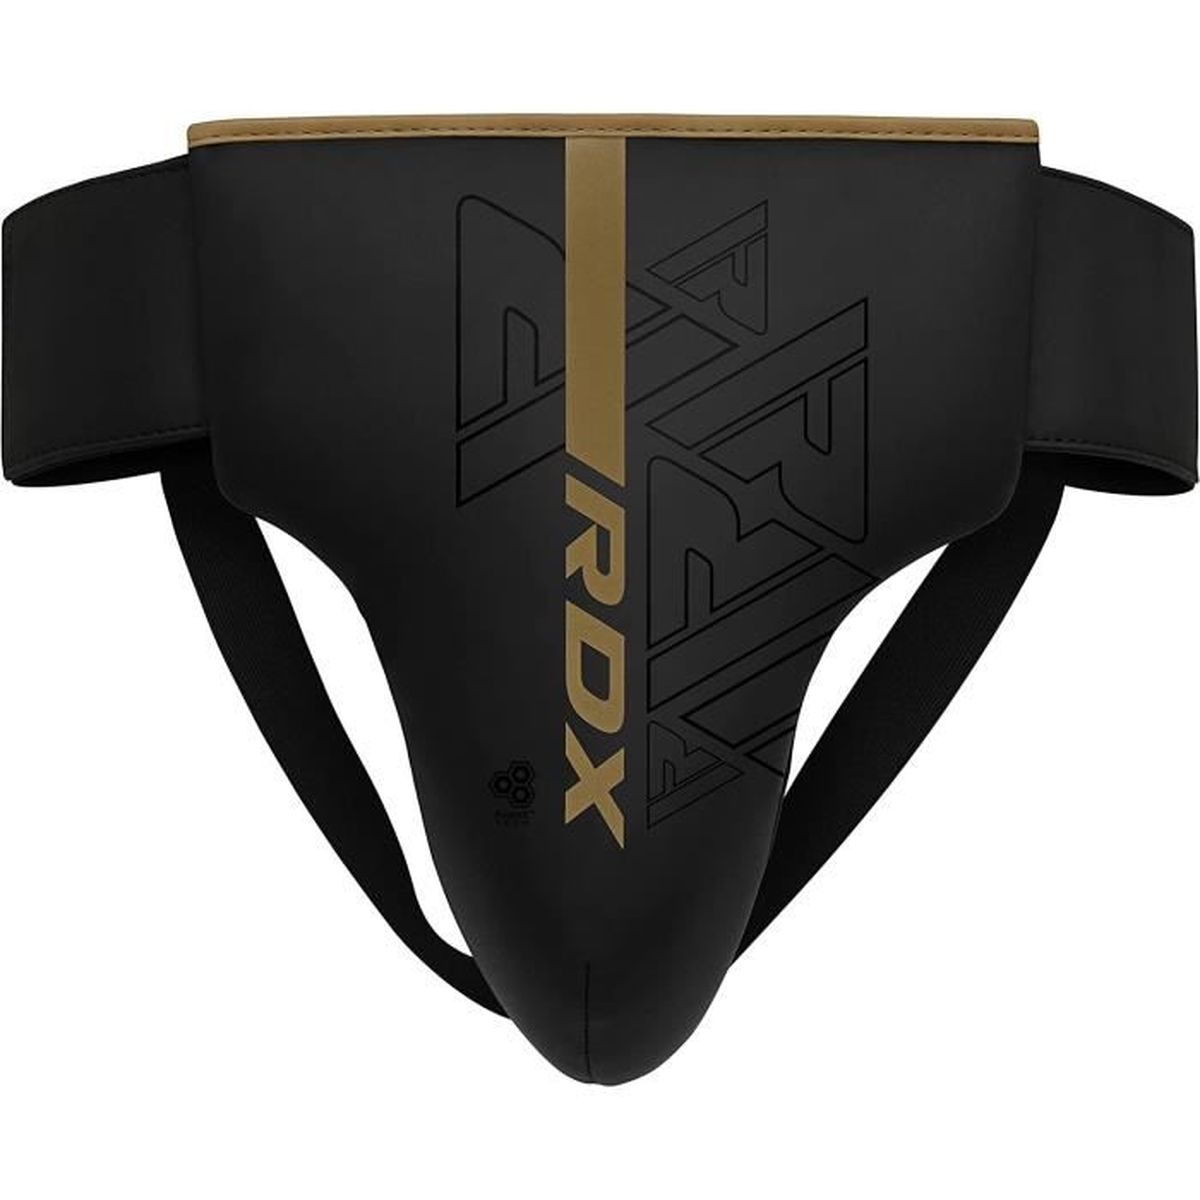 Protection sport mma - Cdiscount